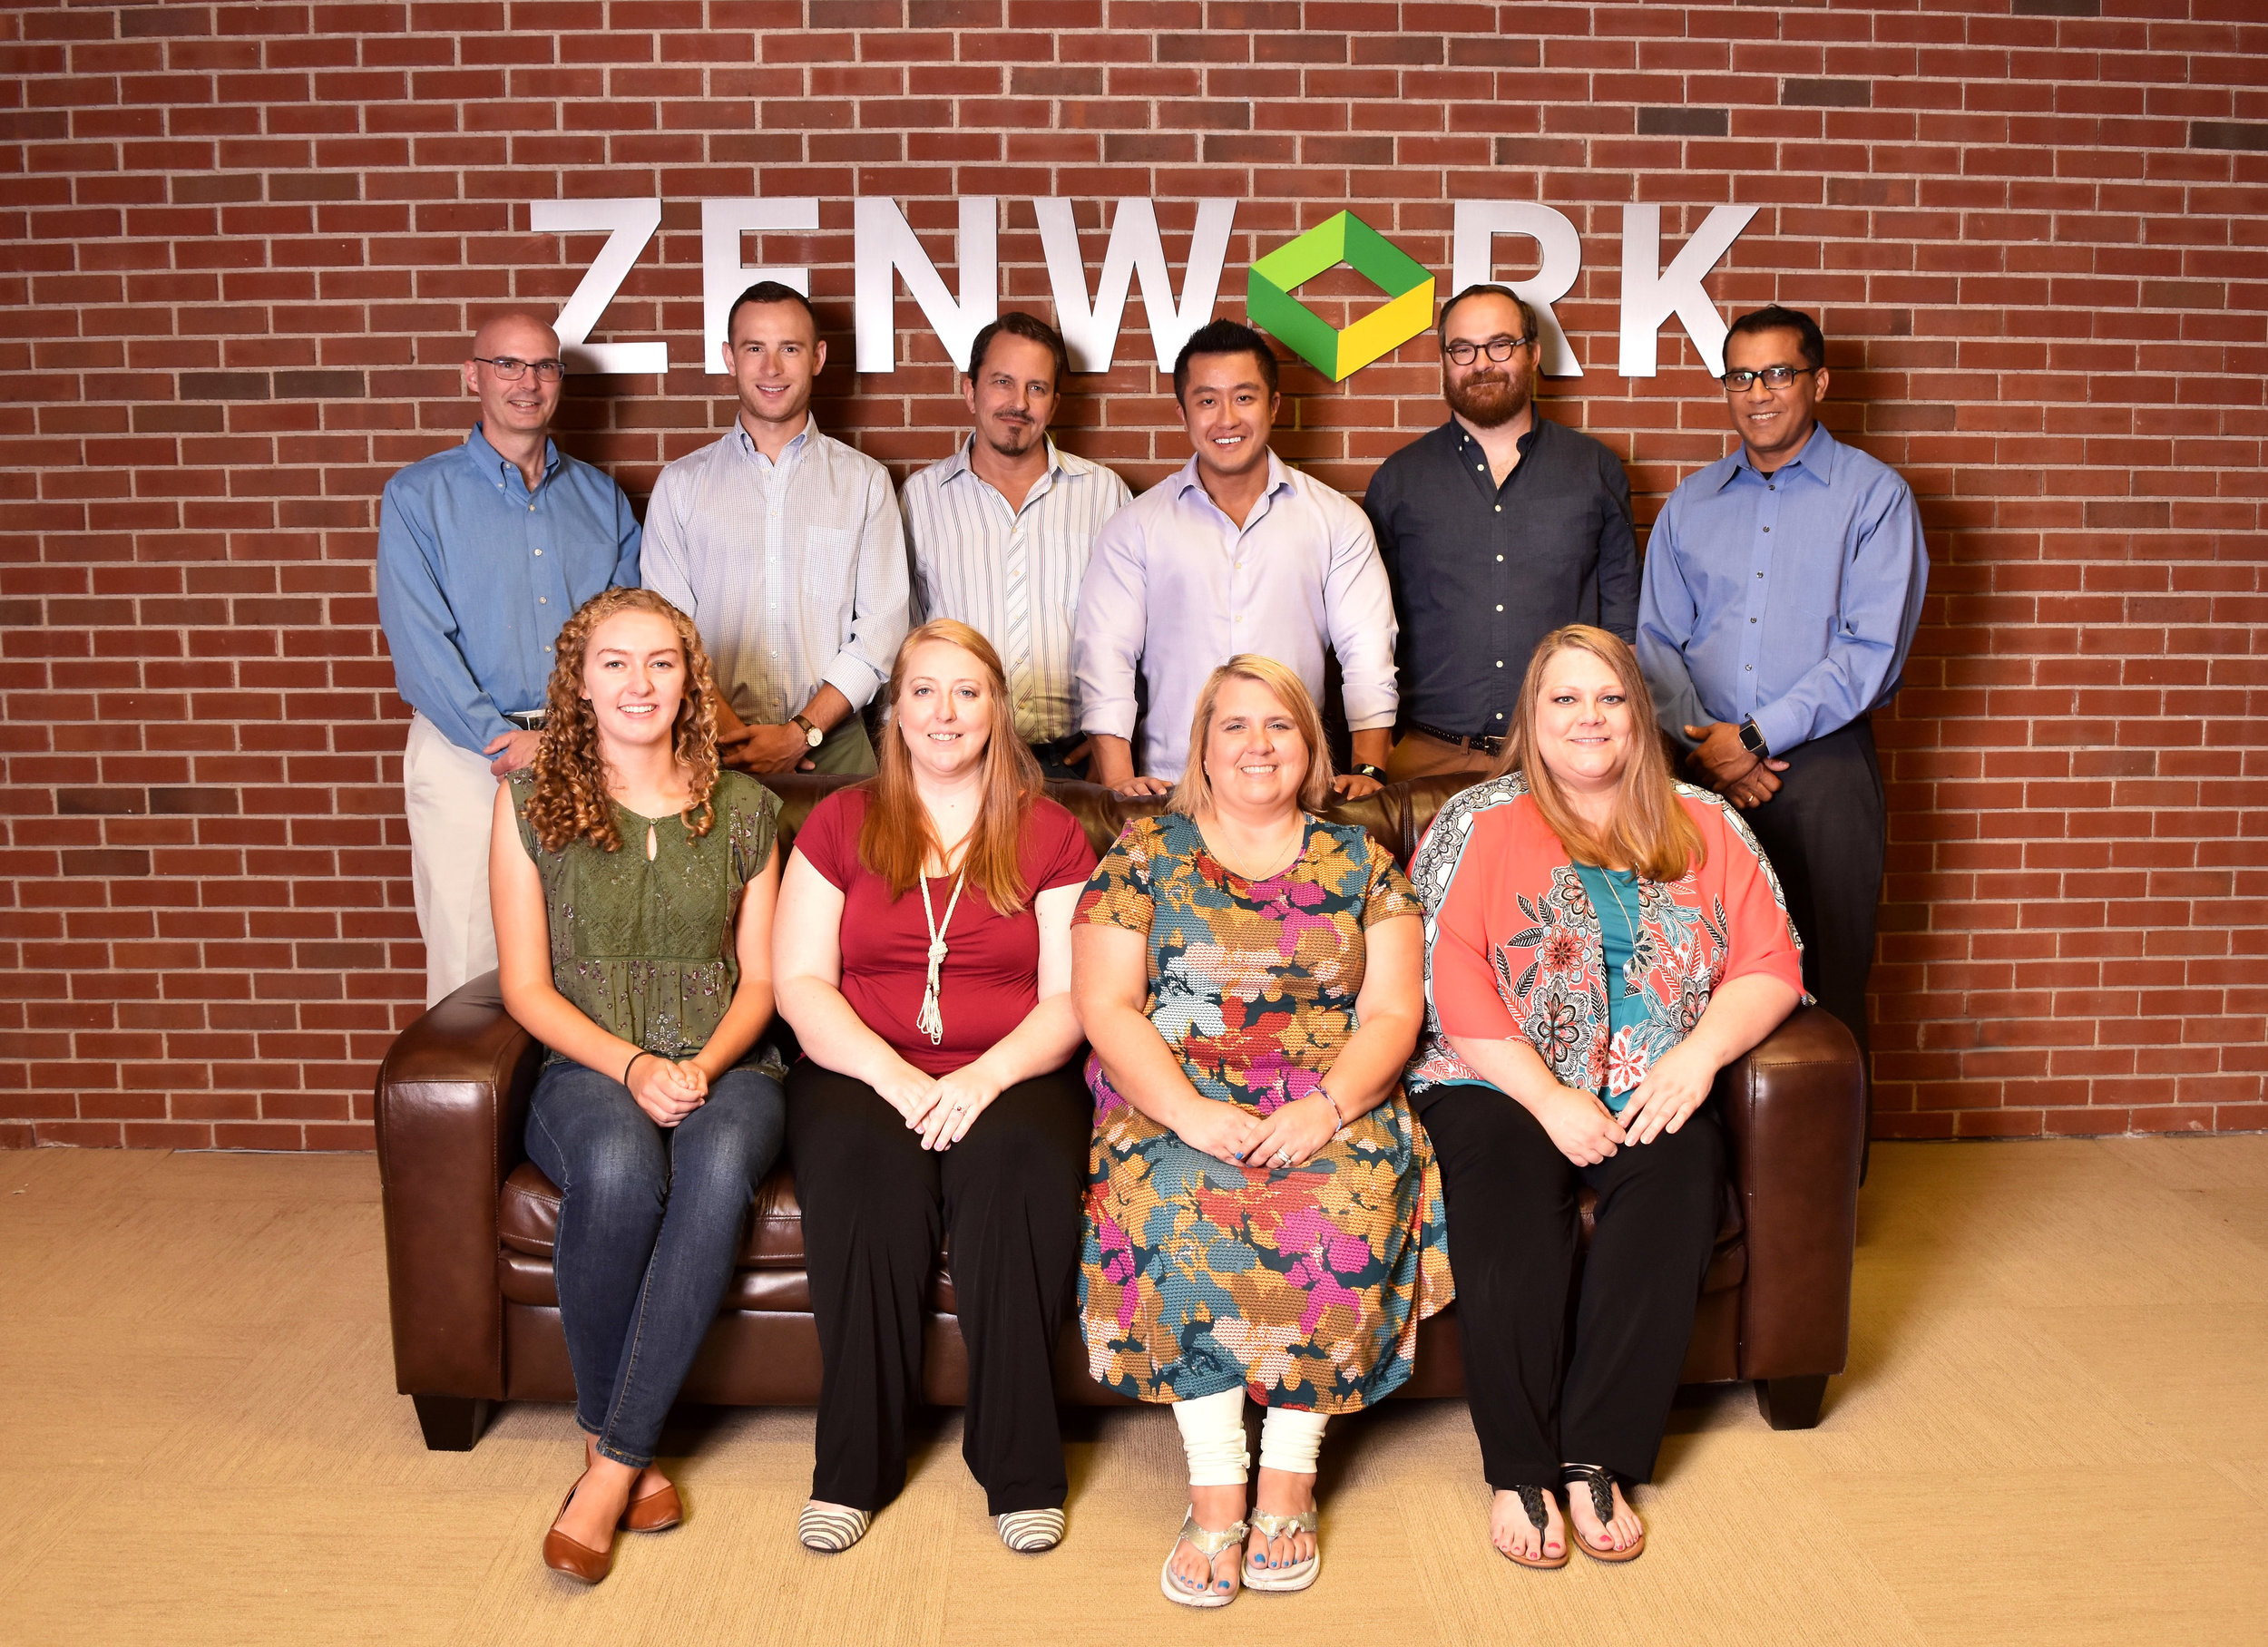 Fayetteville's ZENWORK, has revenue in excess of $5 million a year and 45 employees. It helps customers with tax and regulatory matters.